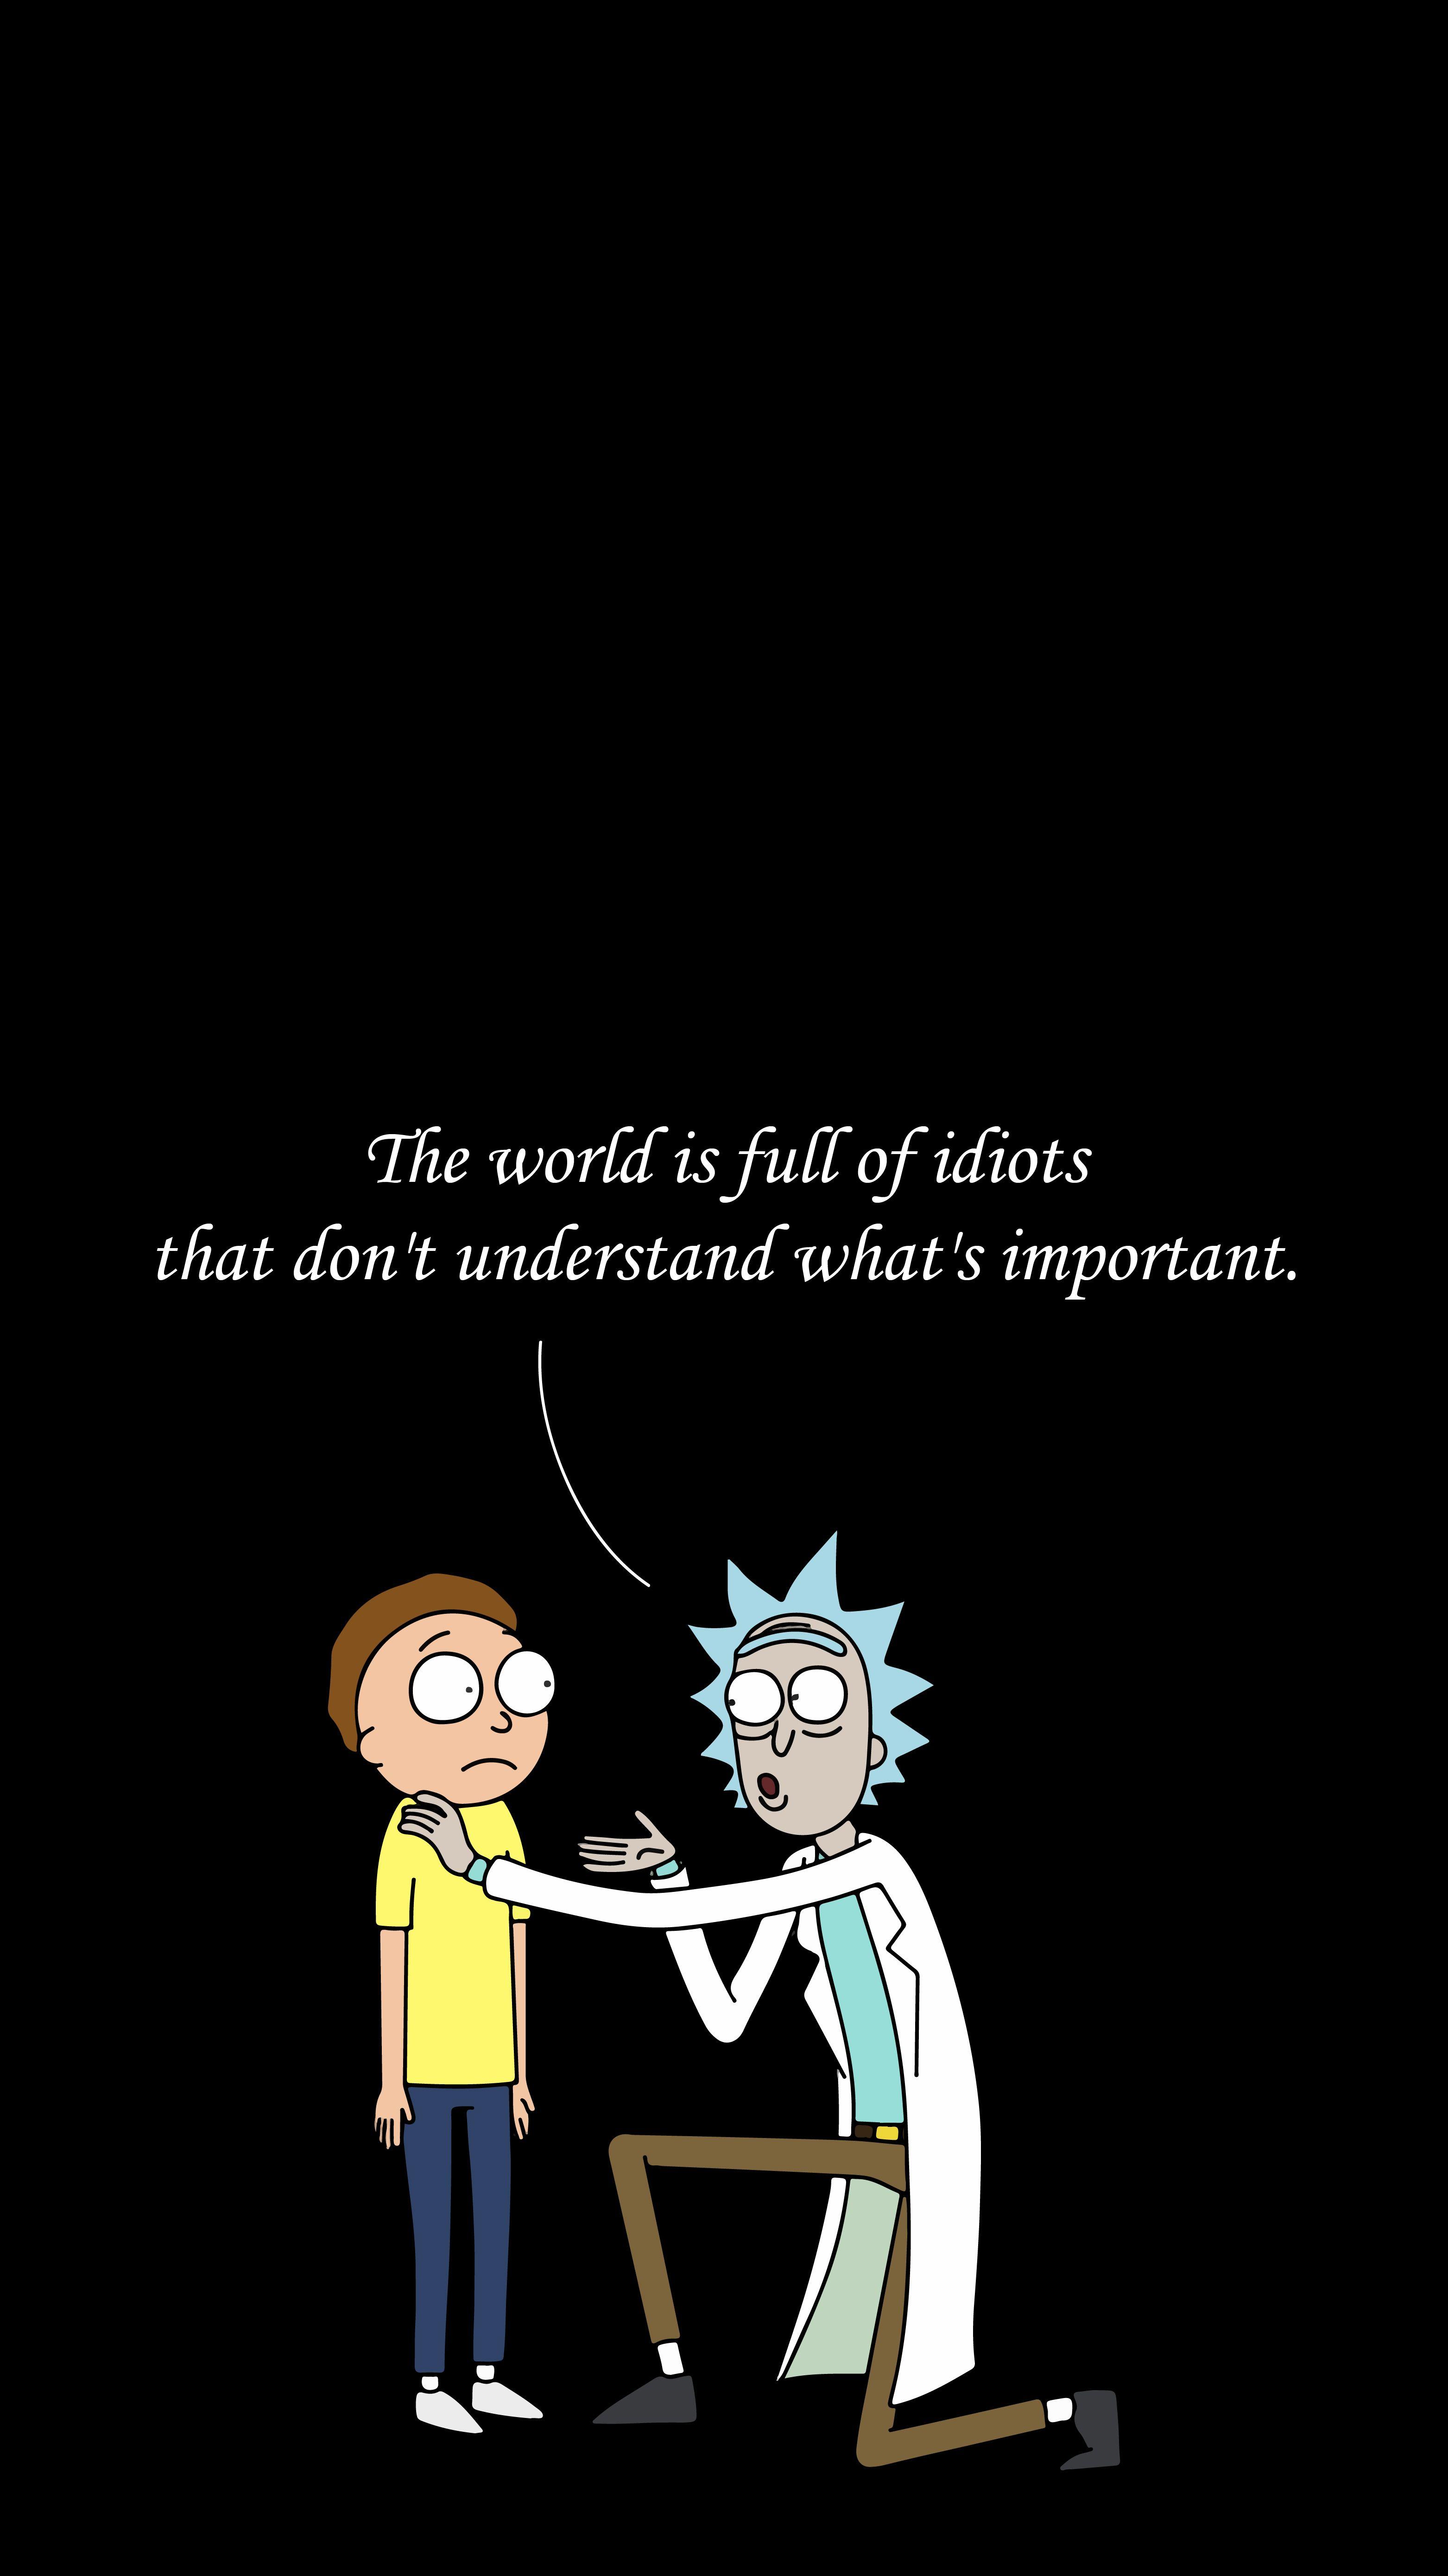 I made a Rick and Morty wallpaper for iPhone 6.: rickandmorty